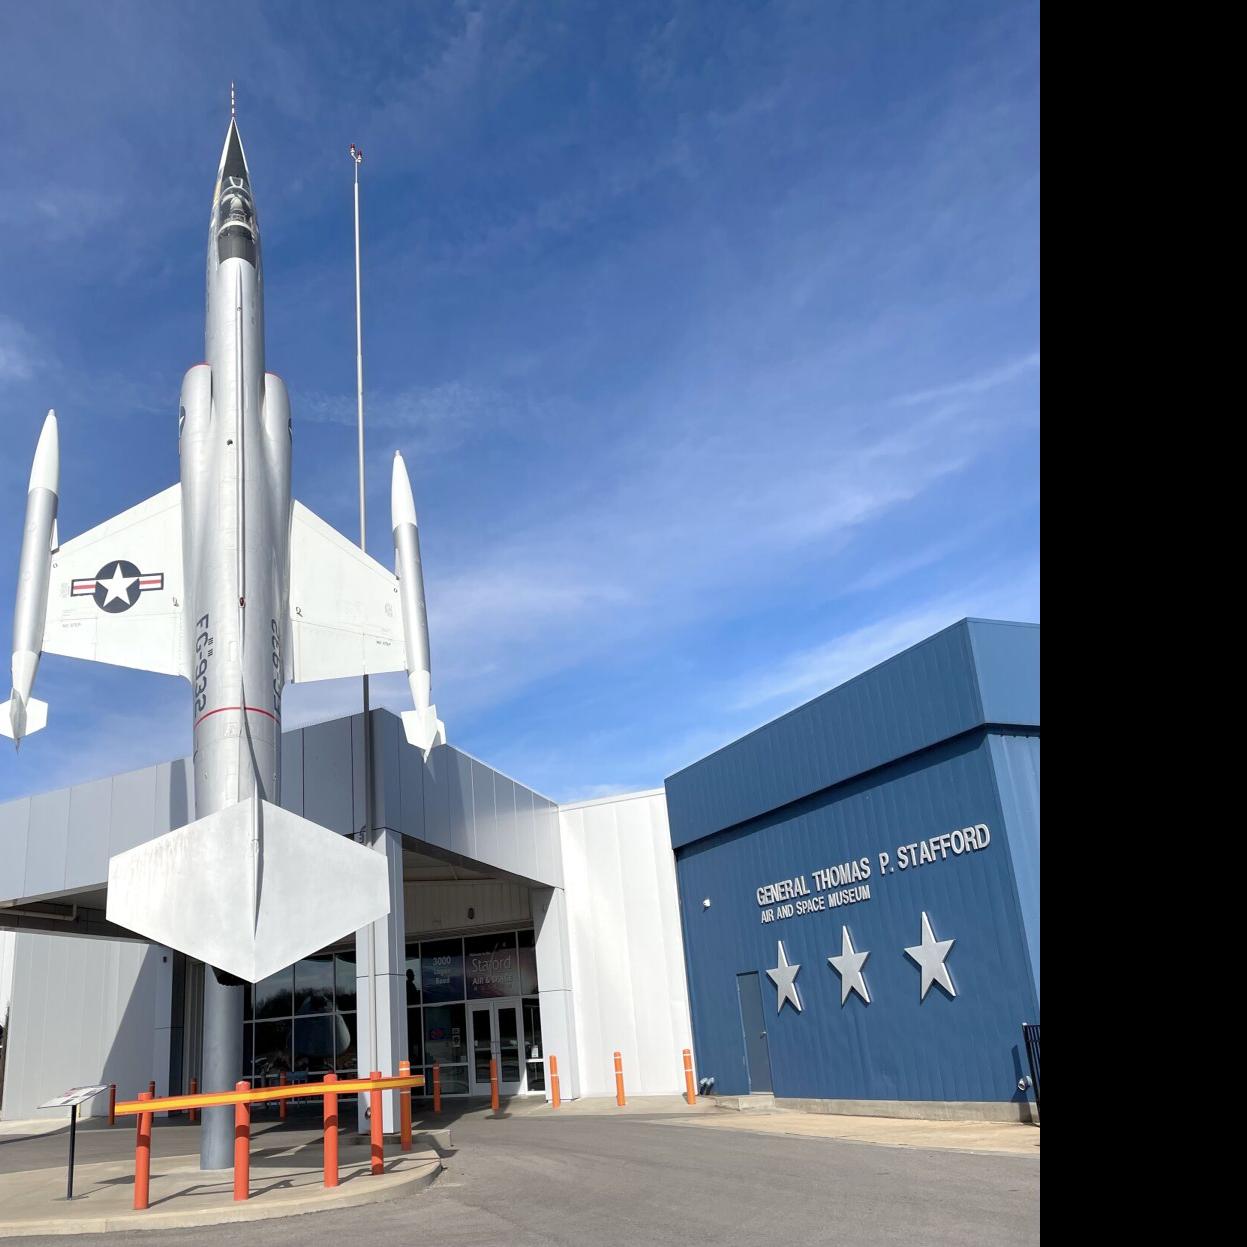 TRAVEL COLUMN: Air and space museum celebrates Thomas Stafford